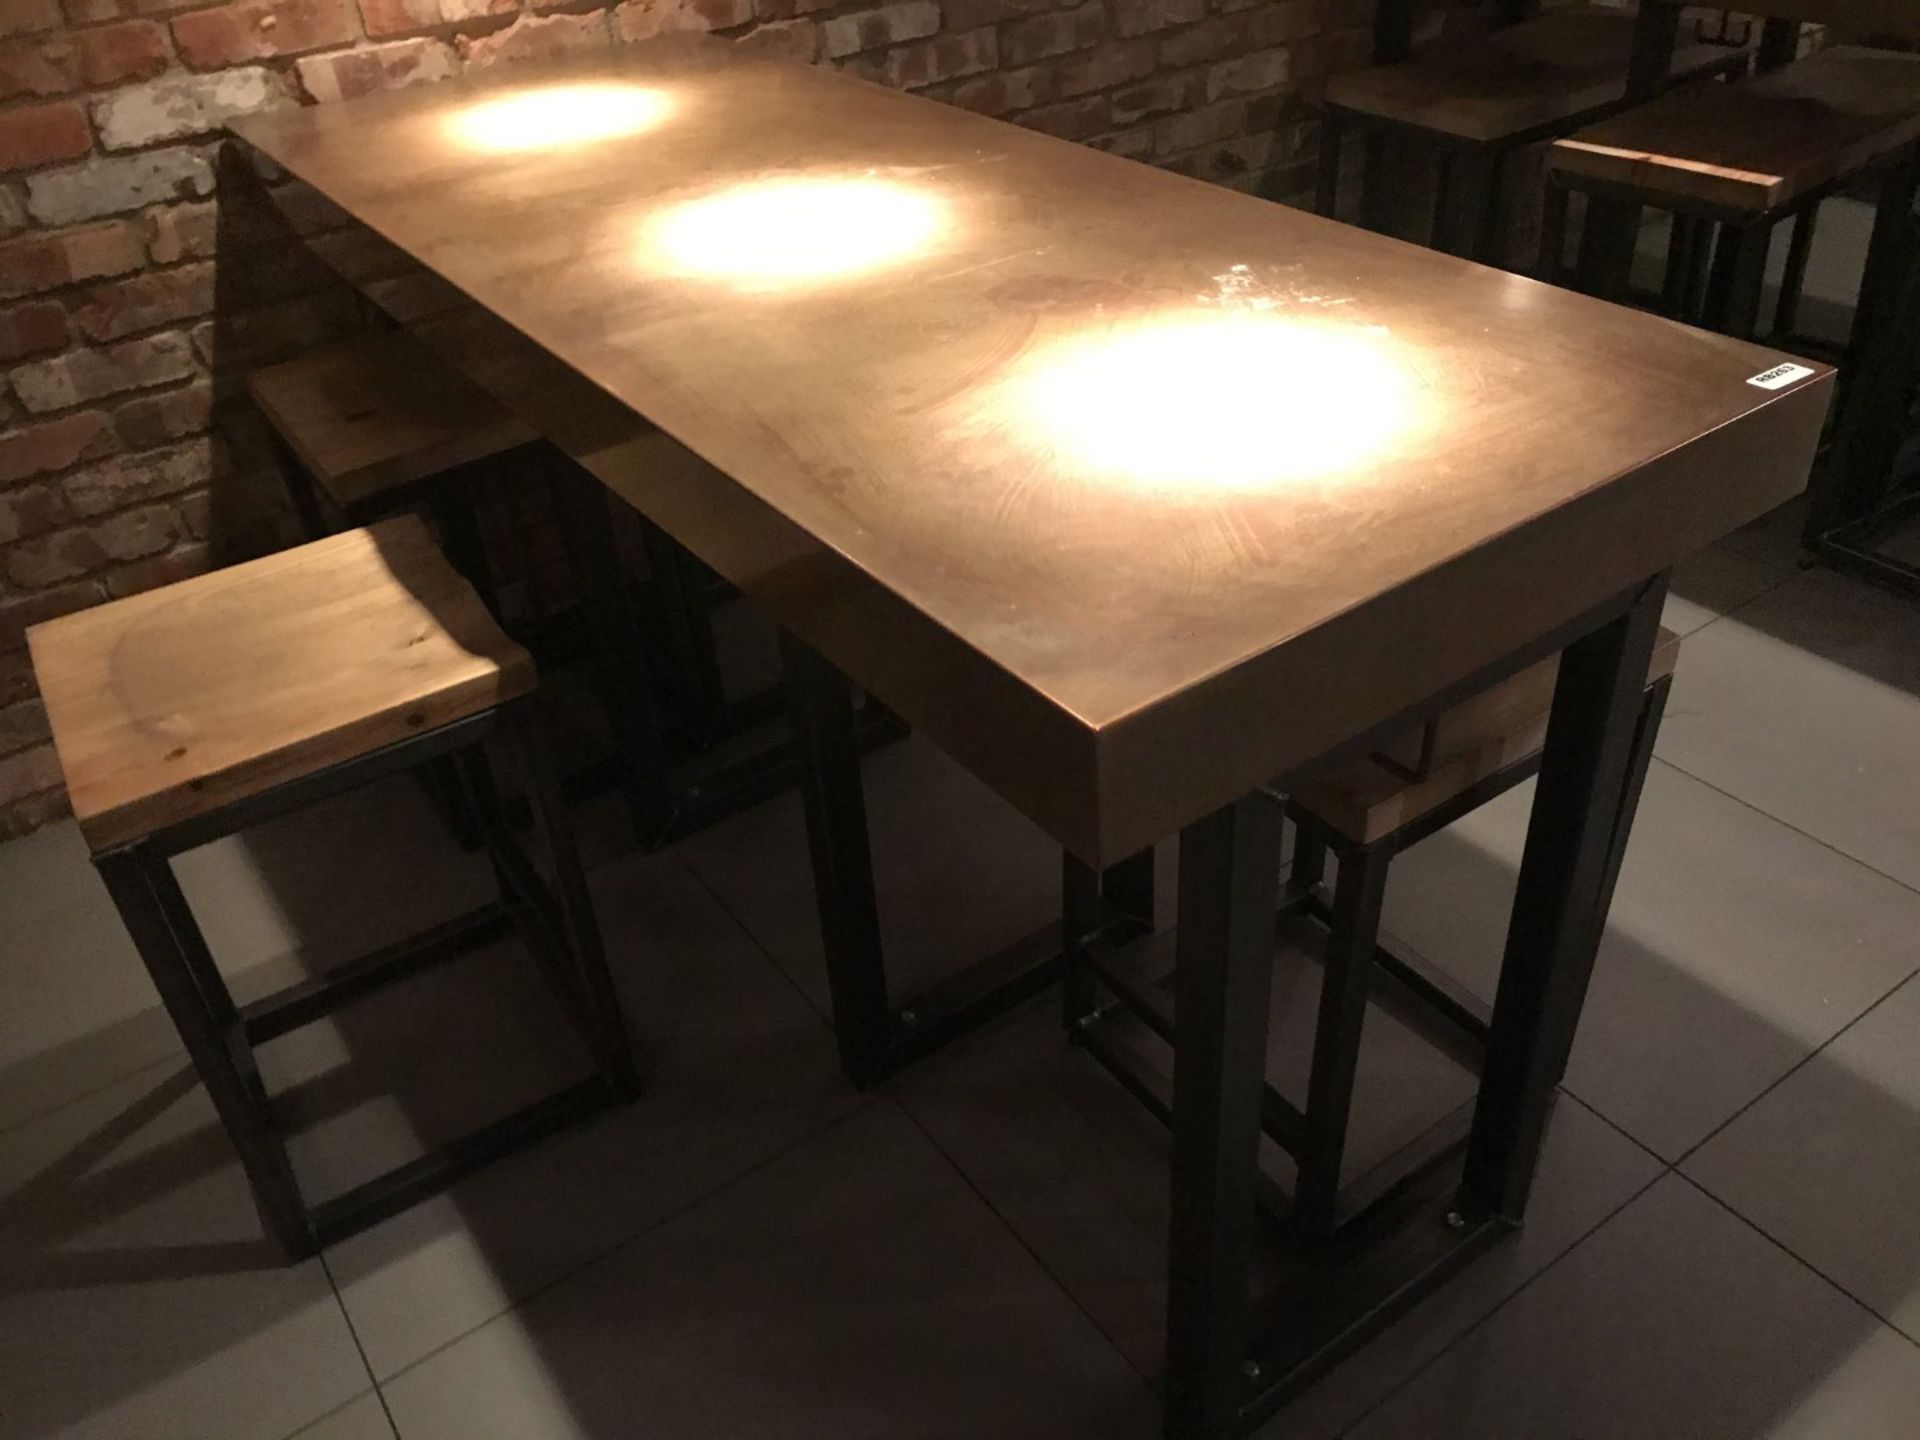 1 x Restaurant Dining Table With Industrial Metal Base and Copper Top - Size H91 x W180 x D70 cms - - Image 7 of 7